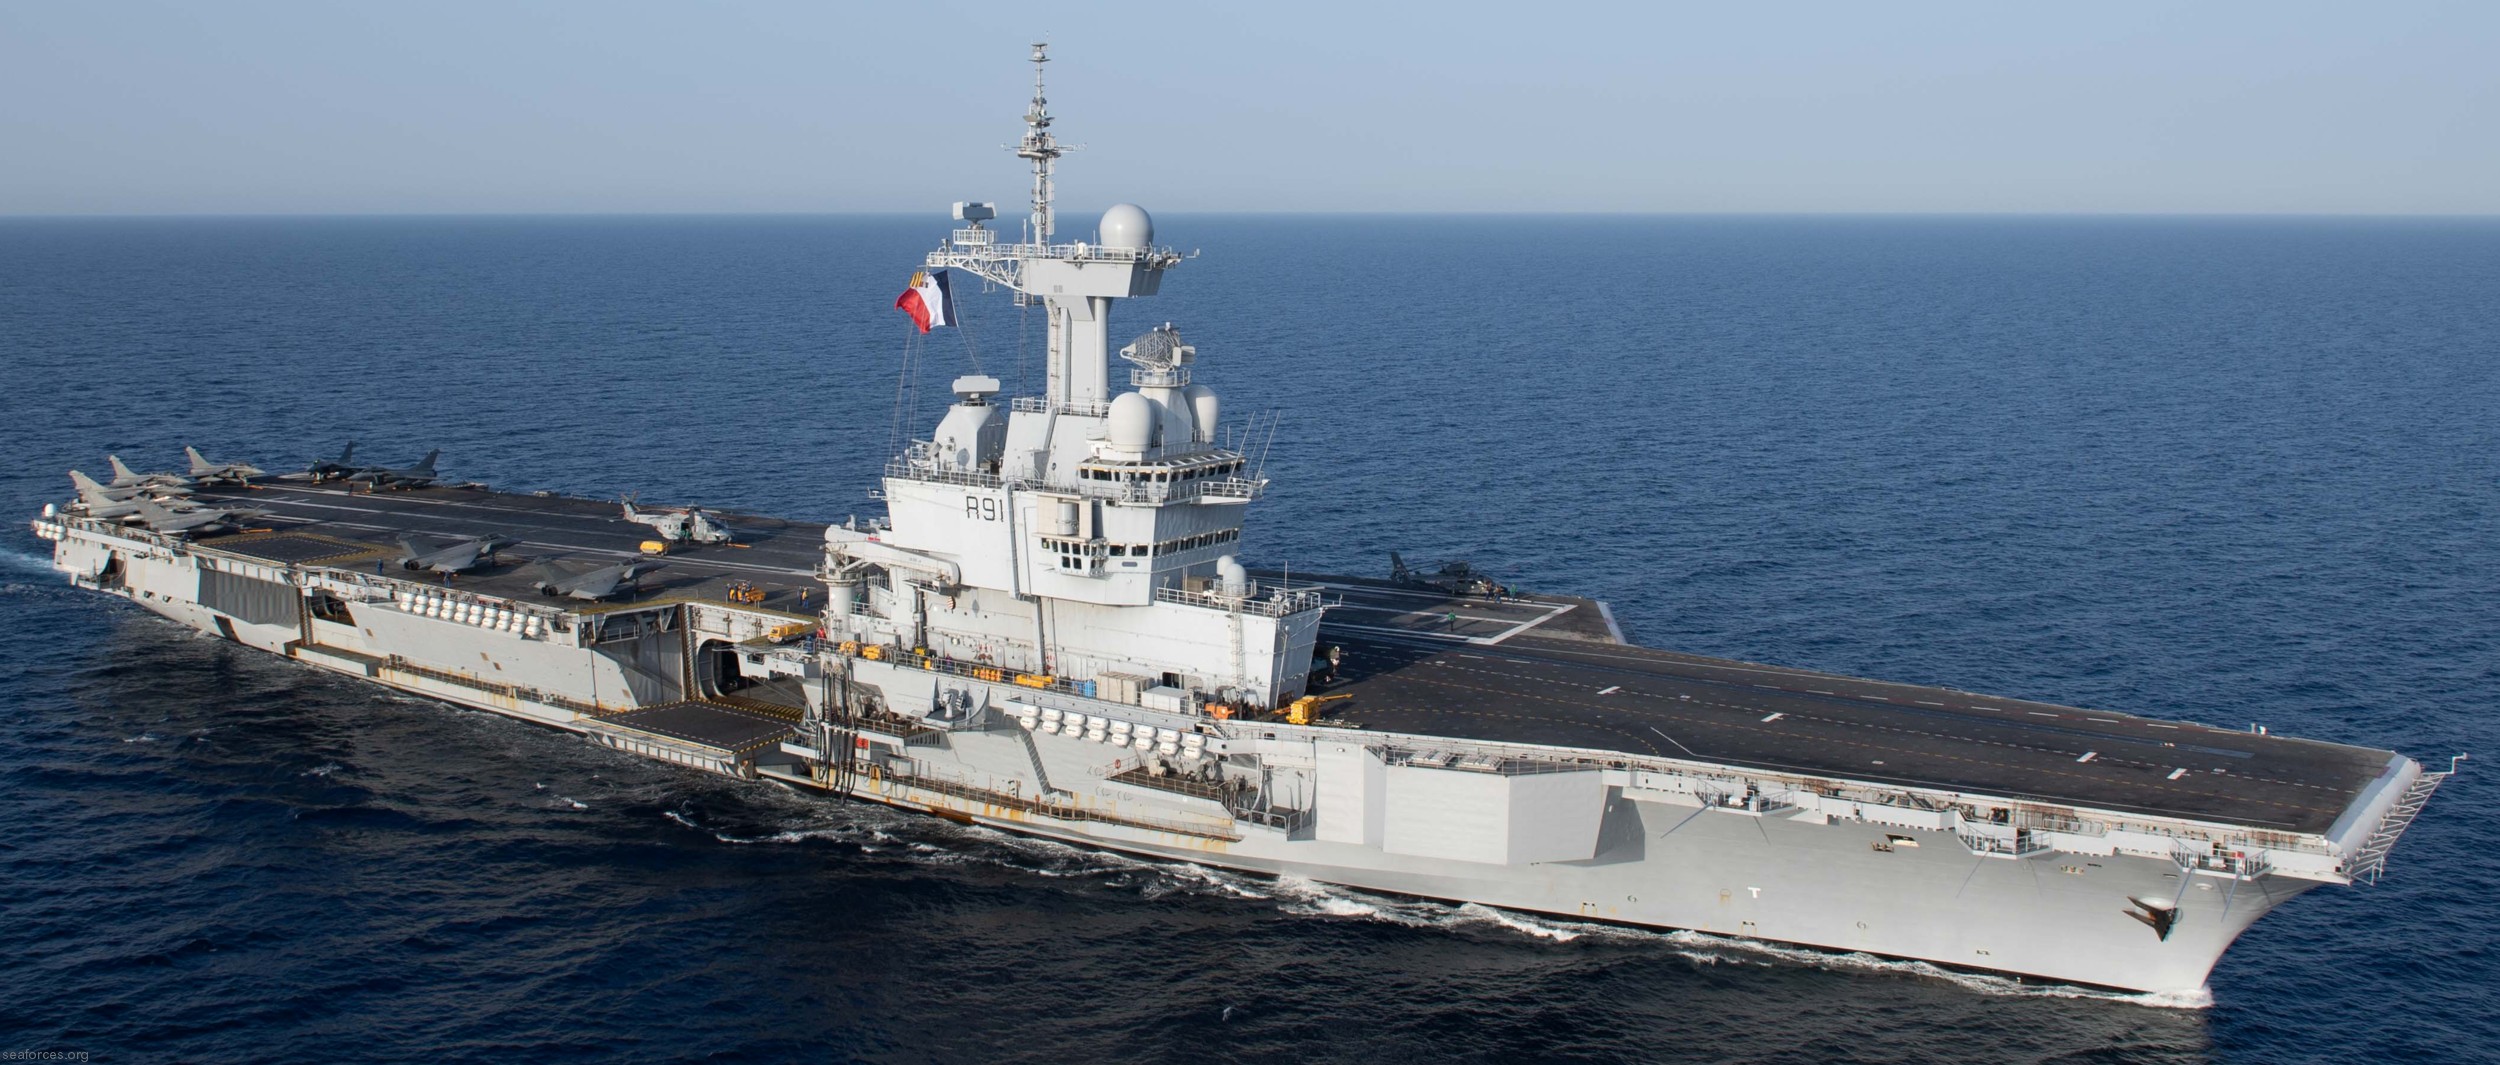 r-91 fs charles de gaulle aircraft carrier french navy 53